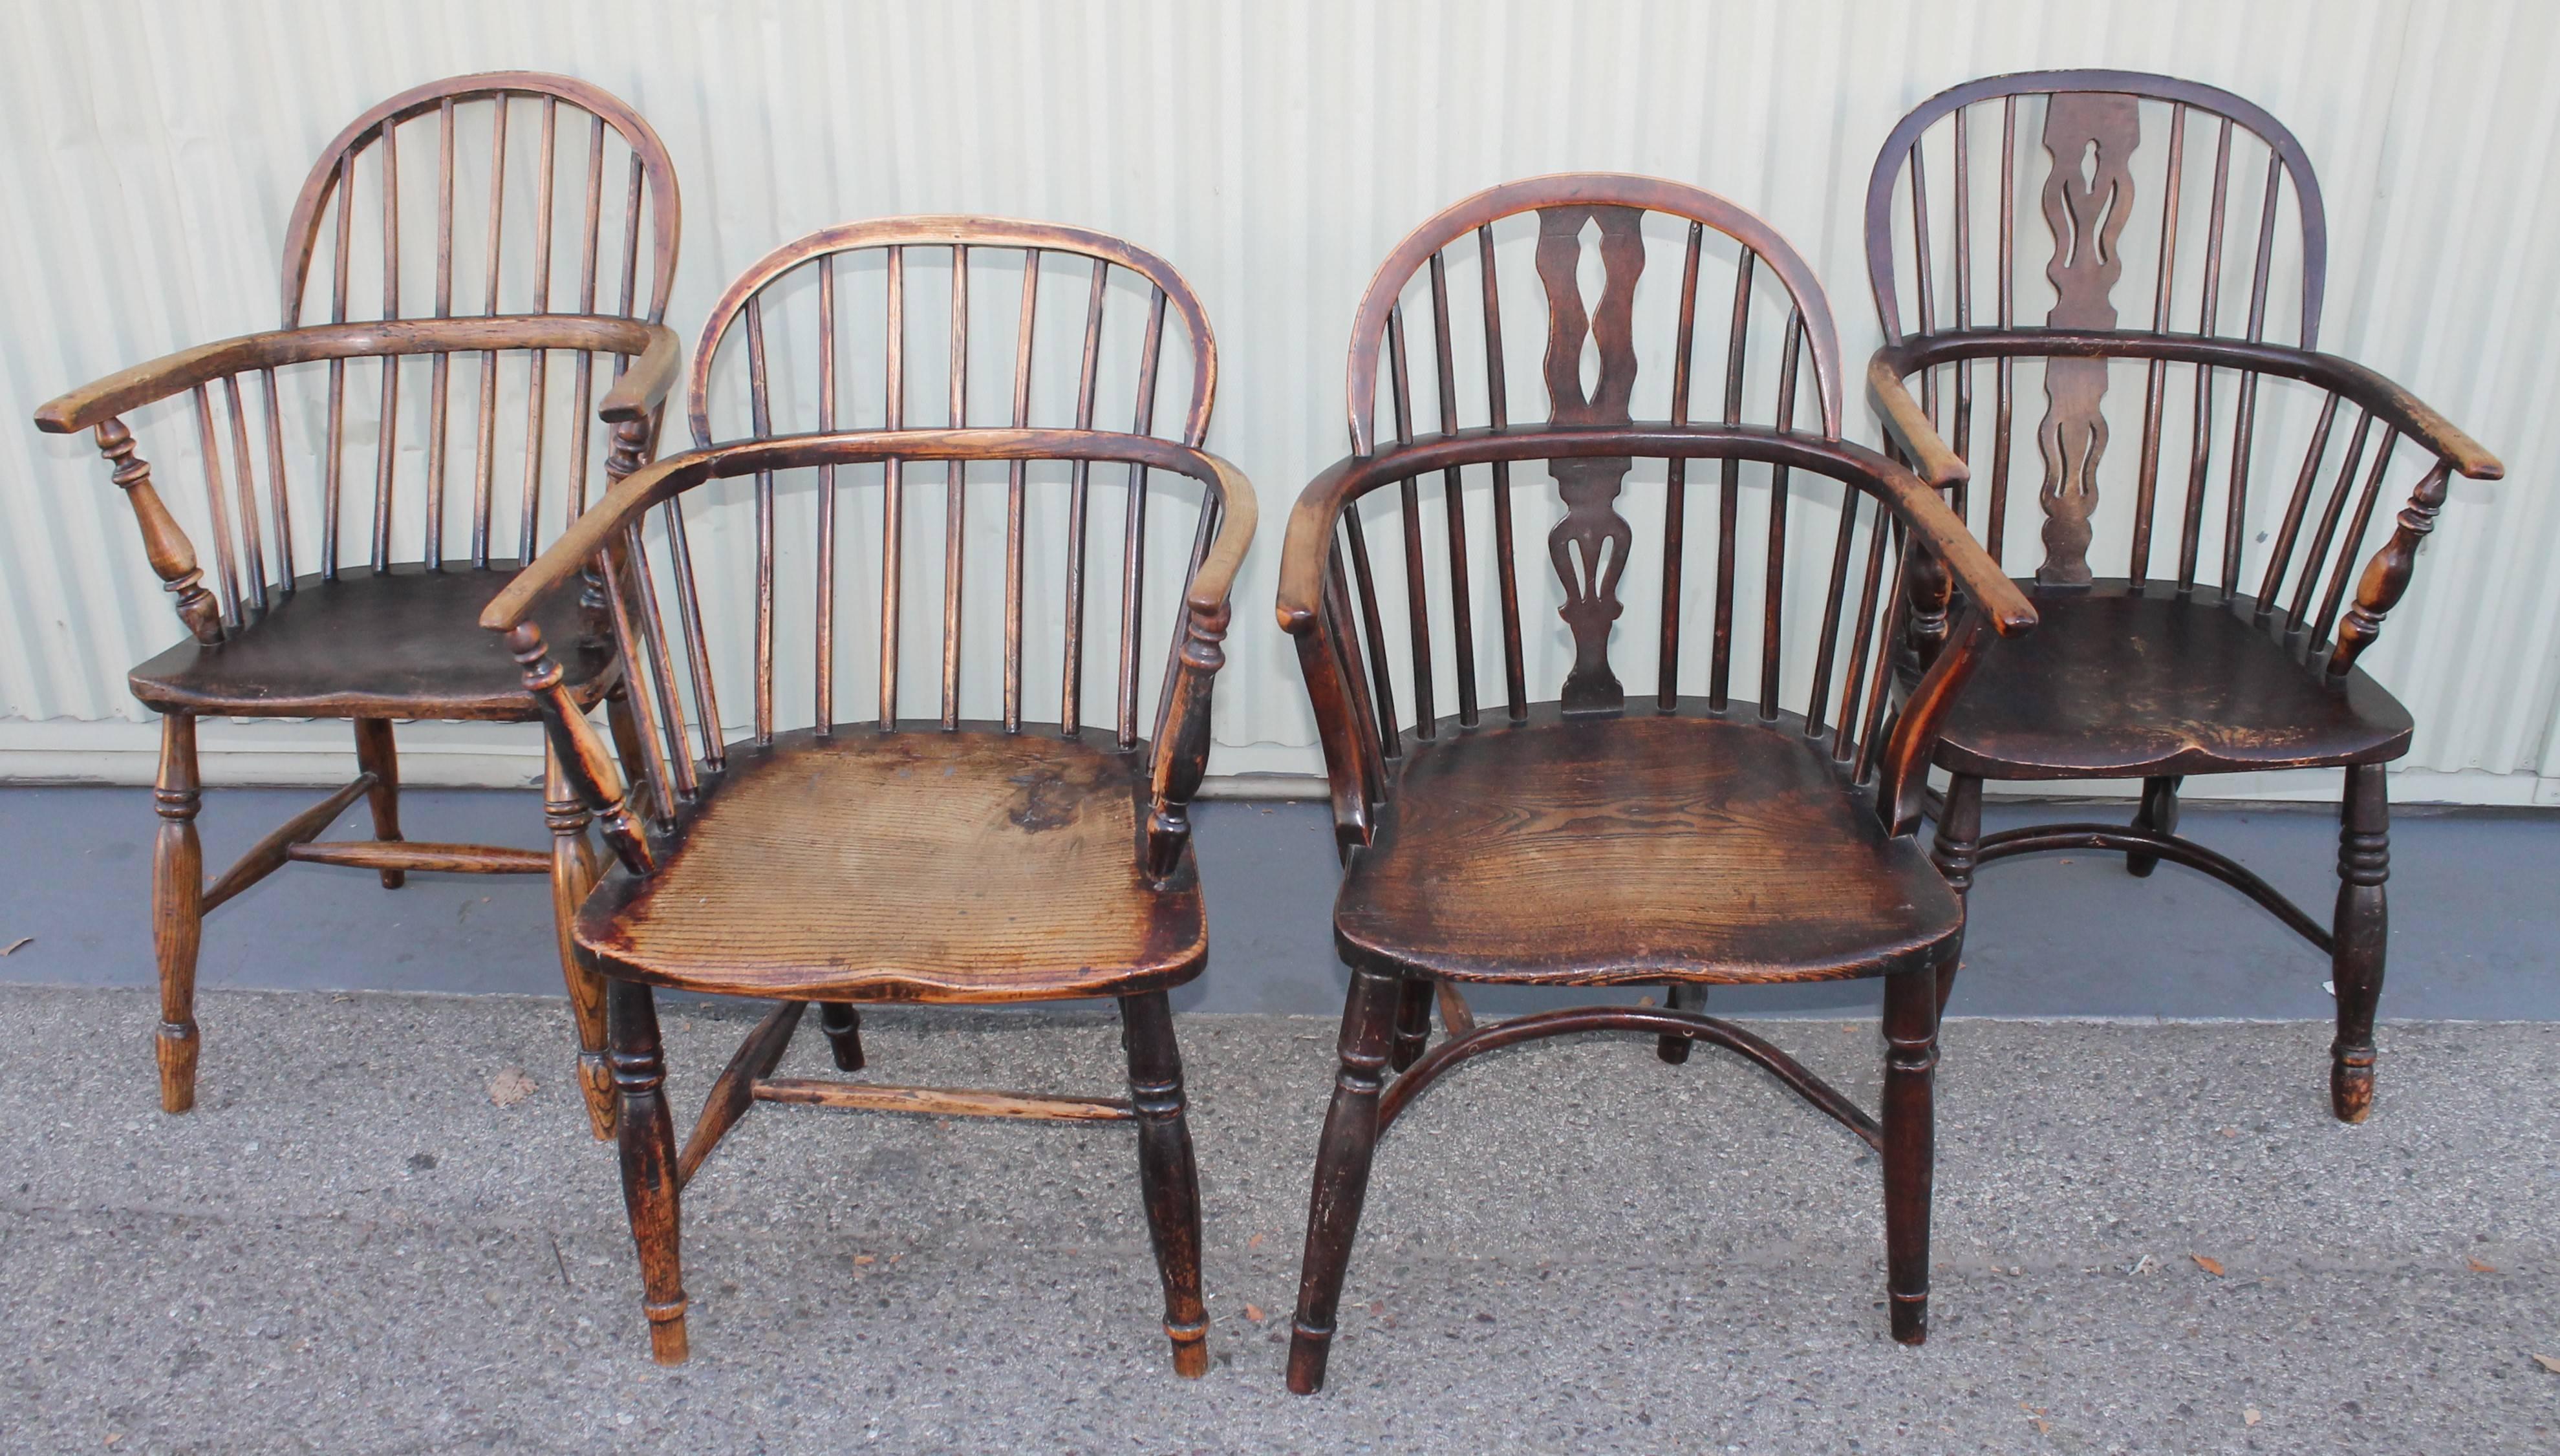 Collection of four Windsor chairs from England. All four chairs are slightly different. Fantastic patina and all in sturdy condition. Minor old small repairs here and there. Wear consistent from age and use.